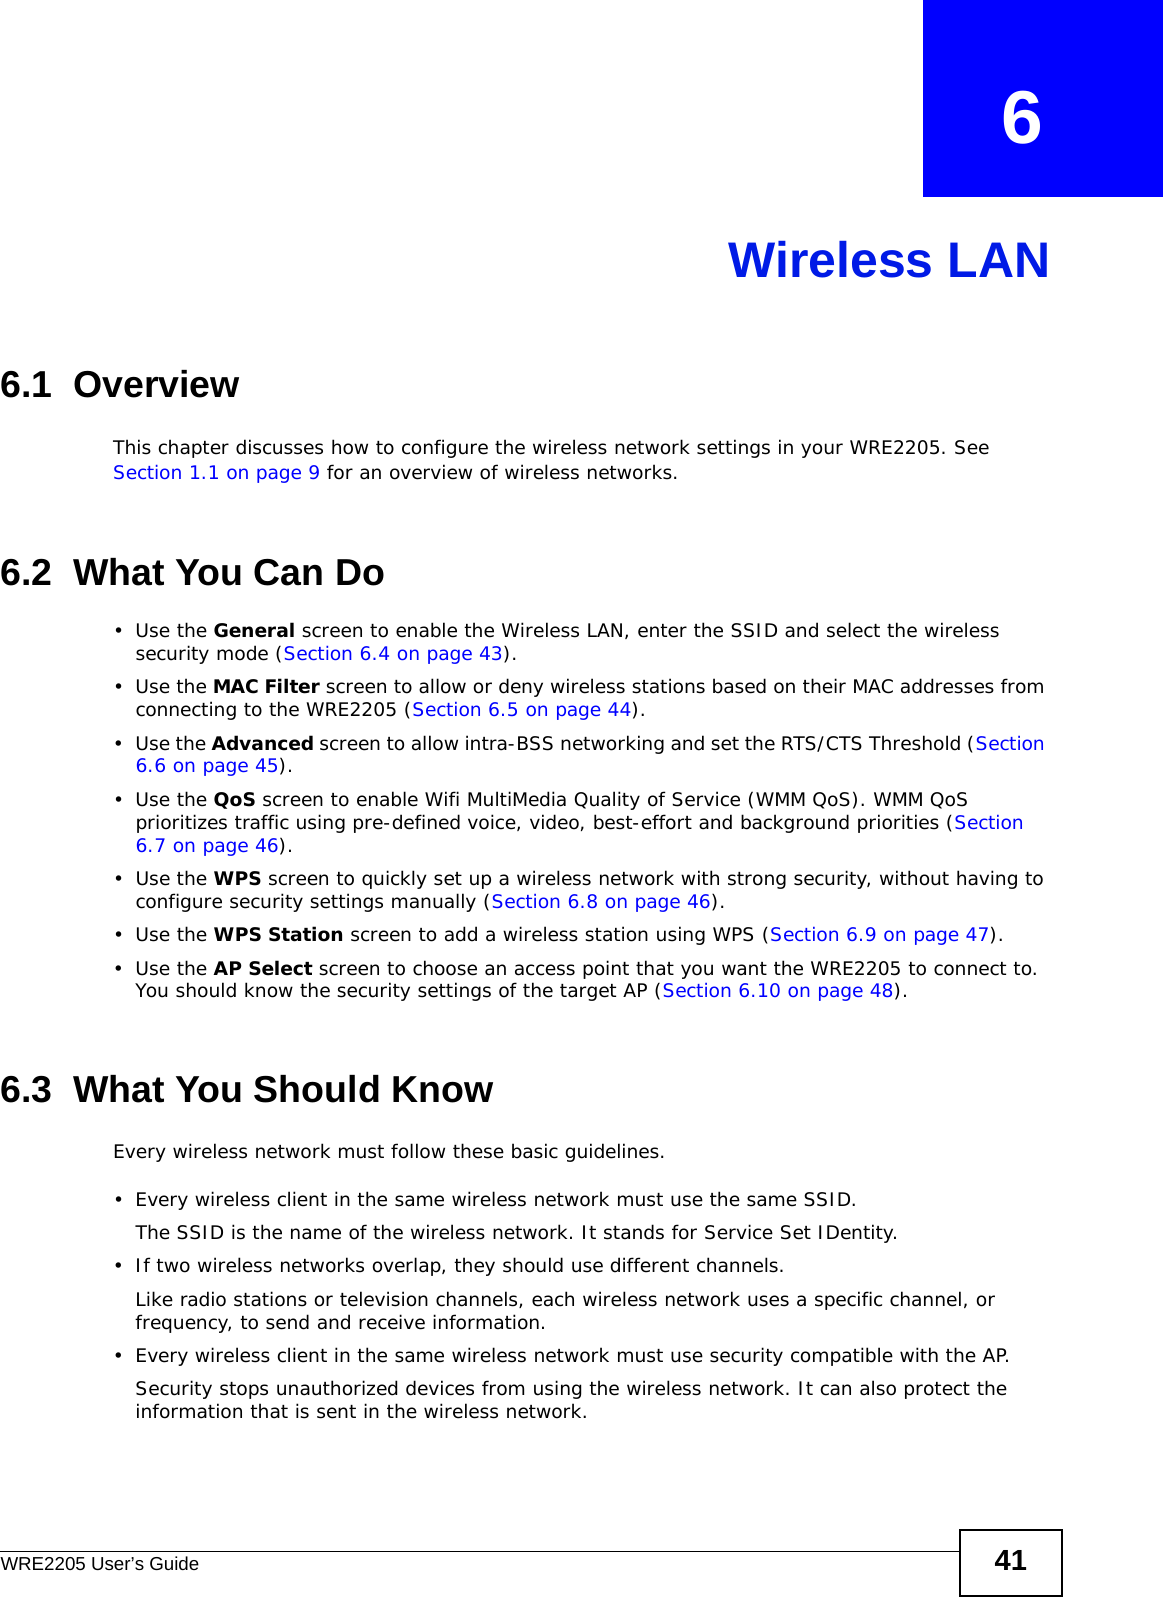 WRE2205 User’s Guide 41CHAPTER   6Wireless LAN6.1  OverviewThis chapter discusses how to configure the wireless network settings in your WRE2205. See Section 1.1 on page 9 for an overview of wireless networks.6.2  What You Can Do•Use the General screen to enable the Wireless LAN, enter the SSID and select the wireless security mode (Section 6.4 on page 43).•Use the MAC Filter screen to allow or deny wireless stations based on their MAC addresses from connecting to the WRE2205 (Section 6.5 on page 44).•Use the Advanced screen to allow intra-BSS networking and set the RTS/CTS Threshold (Section 6.6 on page 45).•Use the QoS screen to enable Wifi MultiMedia Quality of Service (WMM QoS). WMM QoS prioritizes traffic using pre-defined voice, video, best-effort and background priorities (Section 6.7 on page 46).•Use the WPS screen to quickly set up a wireless network with strong security, without having to configure security settings manually (Section 6.8 on page 46).•Use the WPS Station screen to add a wireless station using WPS (Section 6.9 on page 47). •Use the AP Select screen to choose an access point that you want the WRE2205 to connect to. You should know the security settings of the target AP (Section 6.10 on page 48).6.3  What You Should KnowEvery wireless network must follow these basic guidelines.• Every wireless client in the same wireless network must use the same SSID.The SSID is the name of the wireless network. It stands for Service Set IDentity.• If two wireless networks overlap, they should use different channels.Like radio stations or television channels, each wireless network uses a specific channel, or frequency, to send and receive information.• Every wireless client in the same wireless network must use security compatible with the AP.Security stops unauthorized devices from using the wireless network. It can also protect the information that is sent in the wireless network.